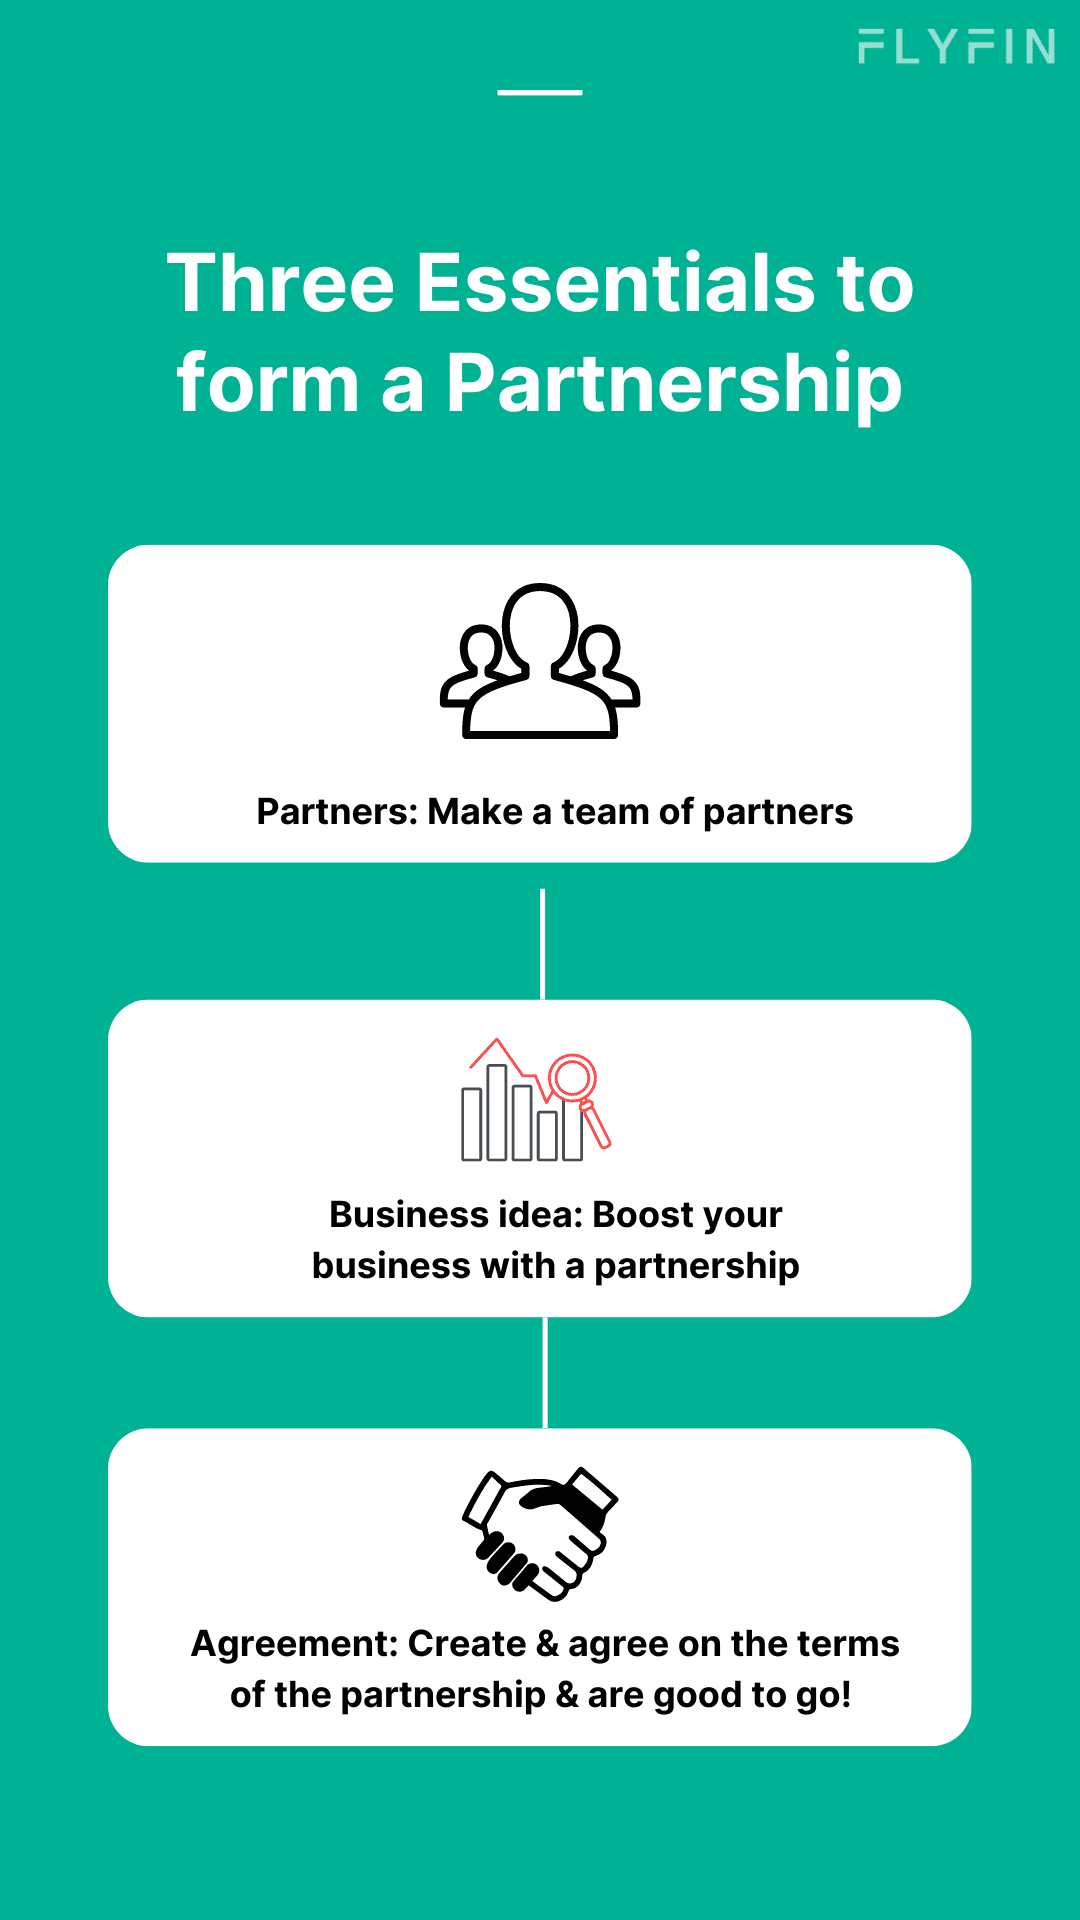 Image shows three essentials to form a partnership - business idea, partners and partnership agreement. No mention of self-employment, 1099, freelancer or taxes.